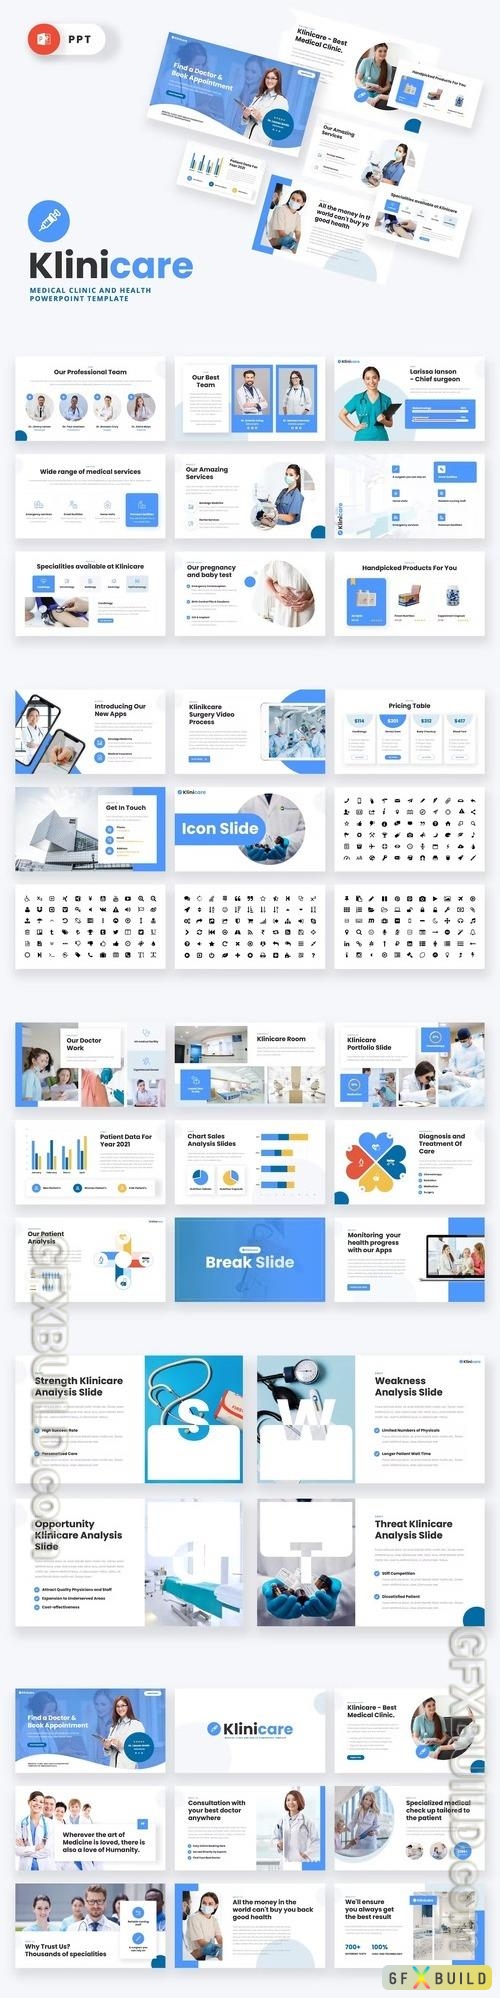 KLINICARE - Medical Clinic Powerpoint Template